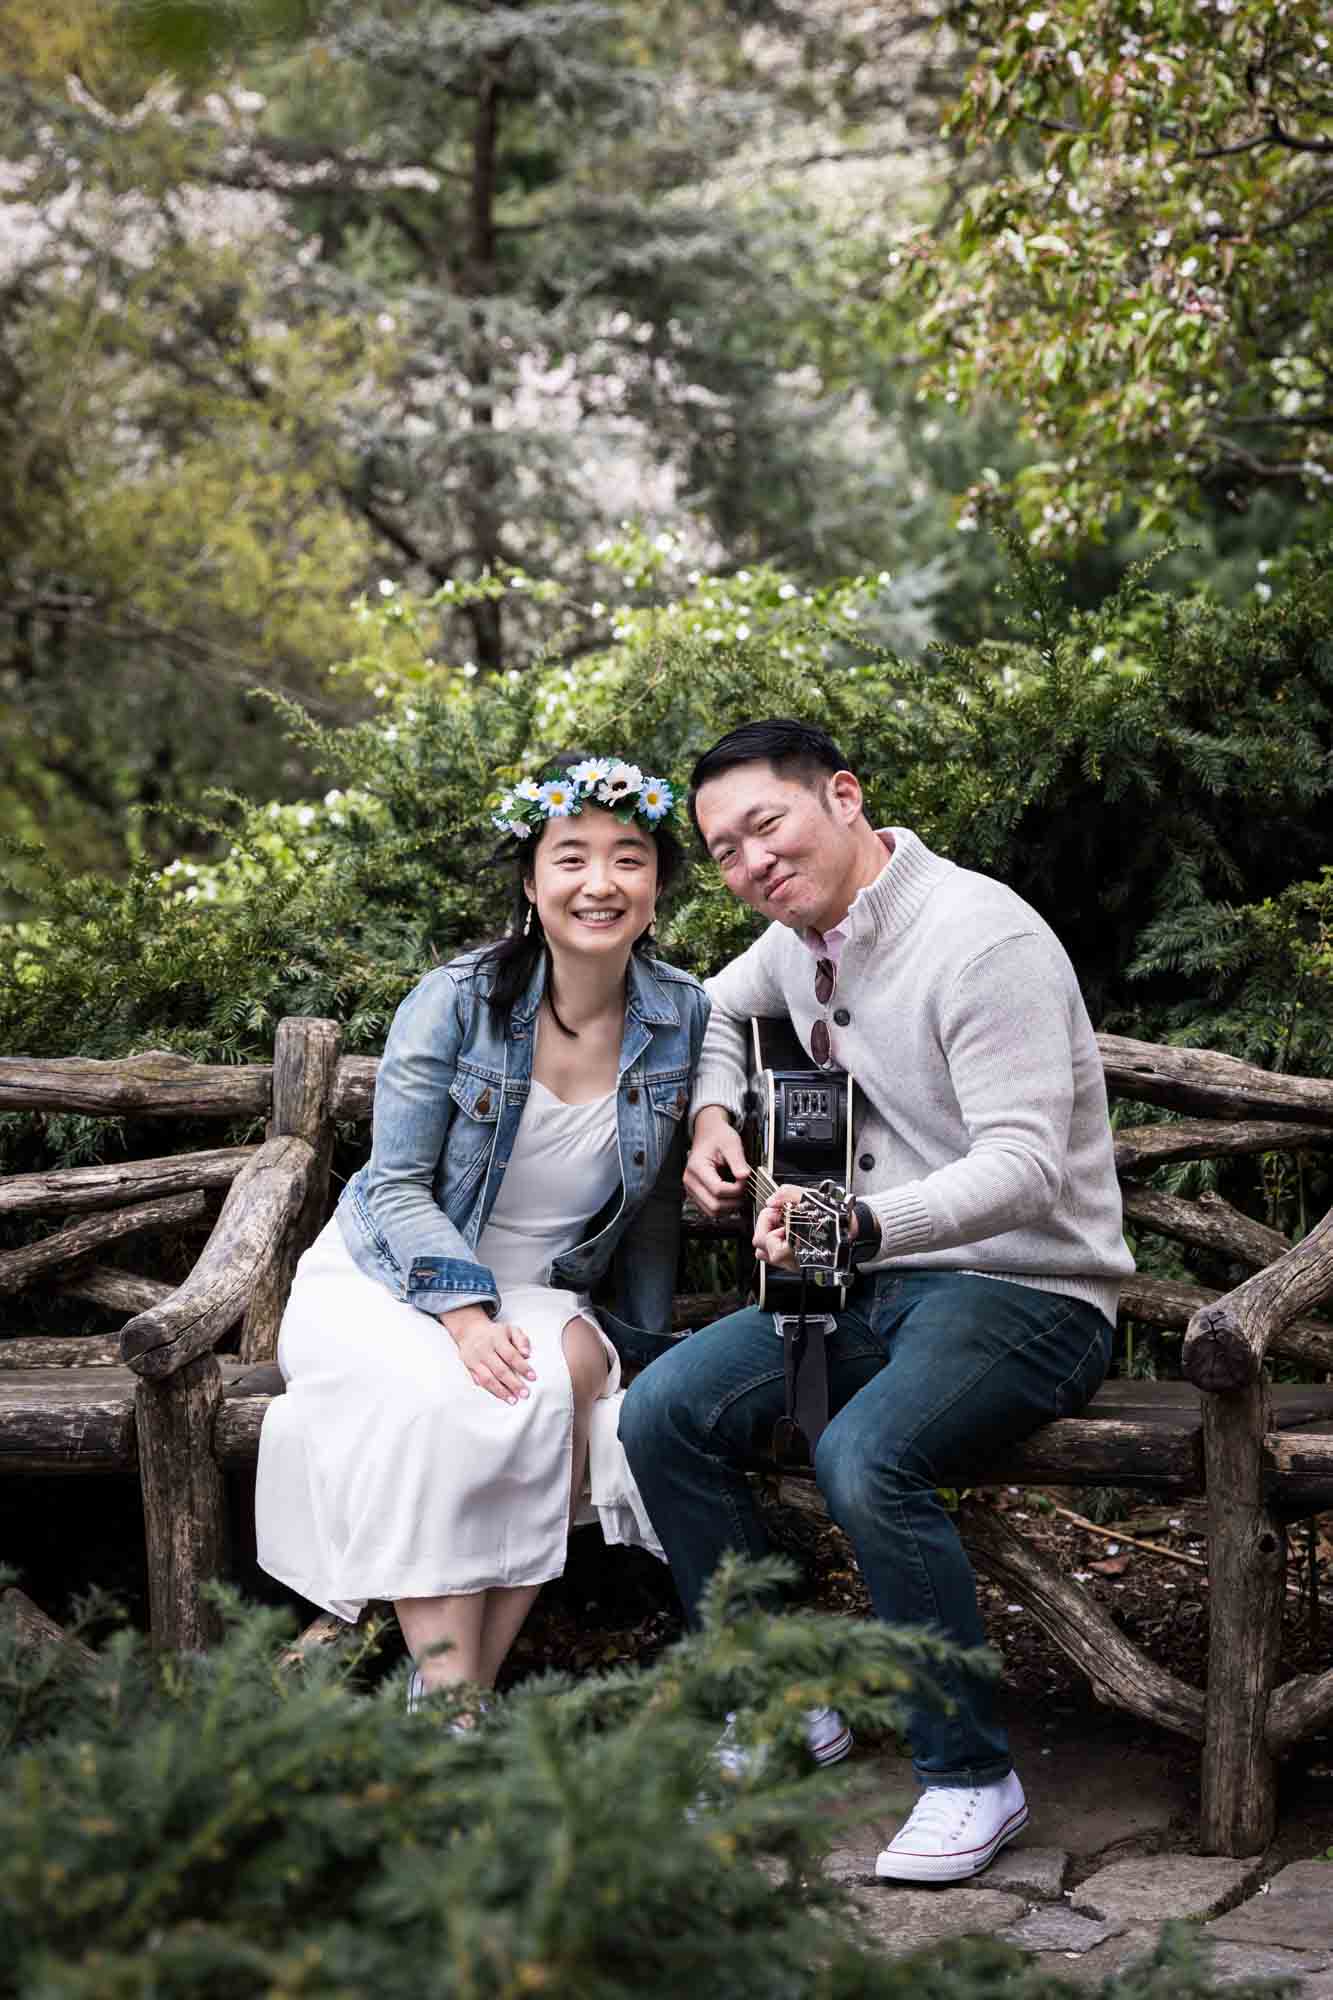 Couple posing with guitar in Shakespeare Garden during engagement shoot